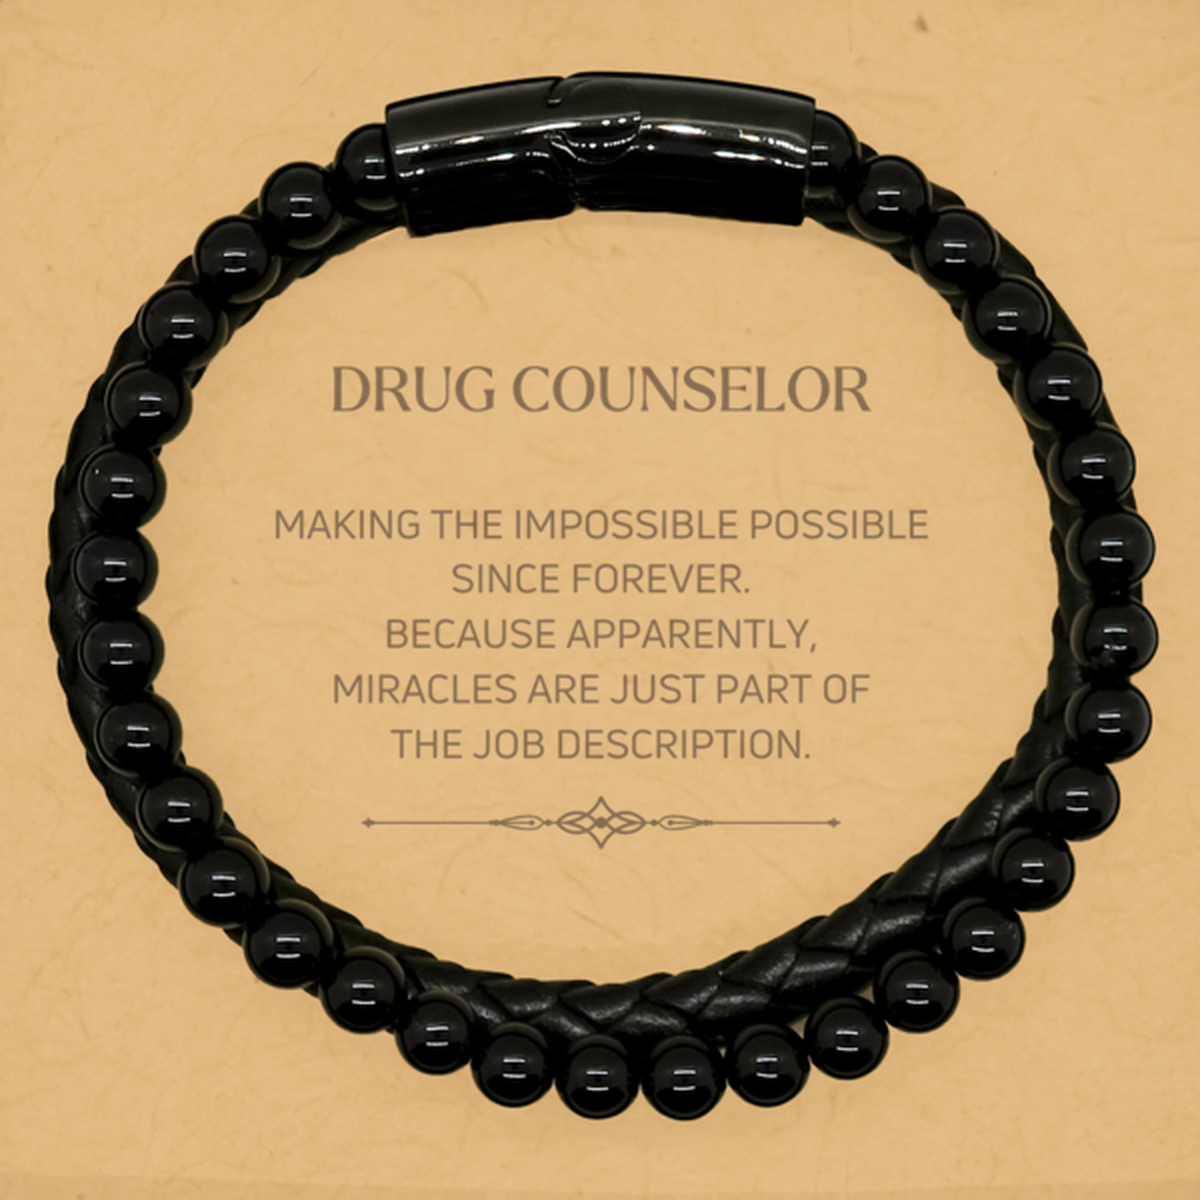 Funny Drug Counselor Gifts, Miracles are just part of the job description, Inspirational Birthday Stone Leather Bracelets For Drug Counselor, Men, Women, Coworkers, Friends, Boss